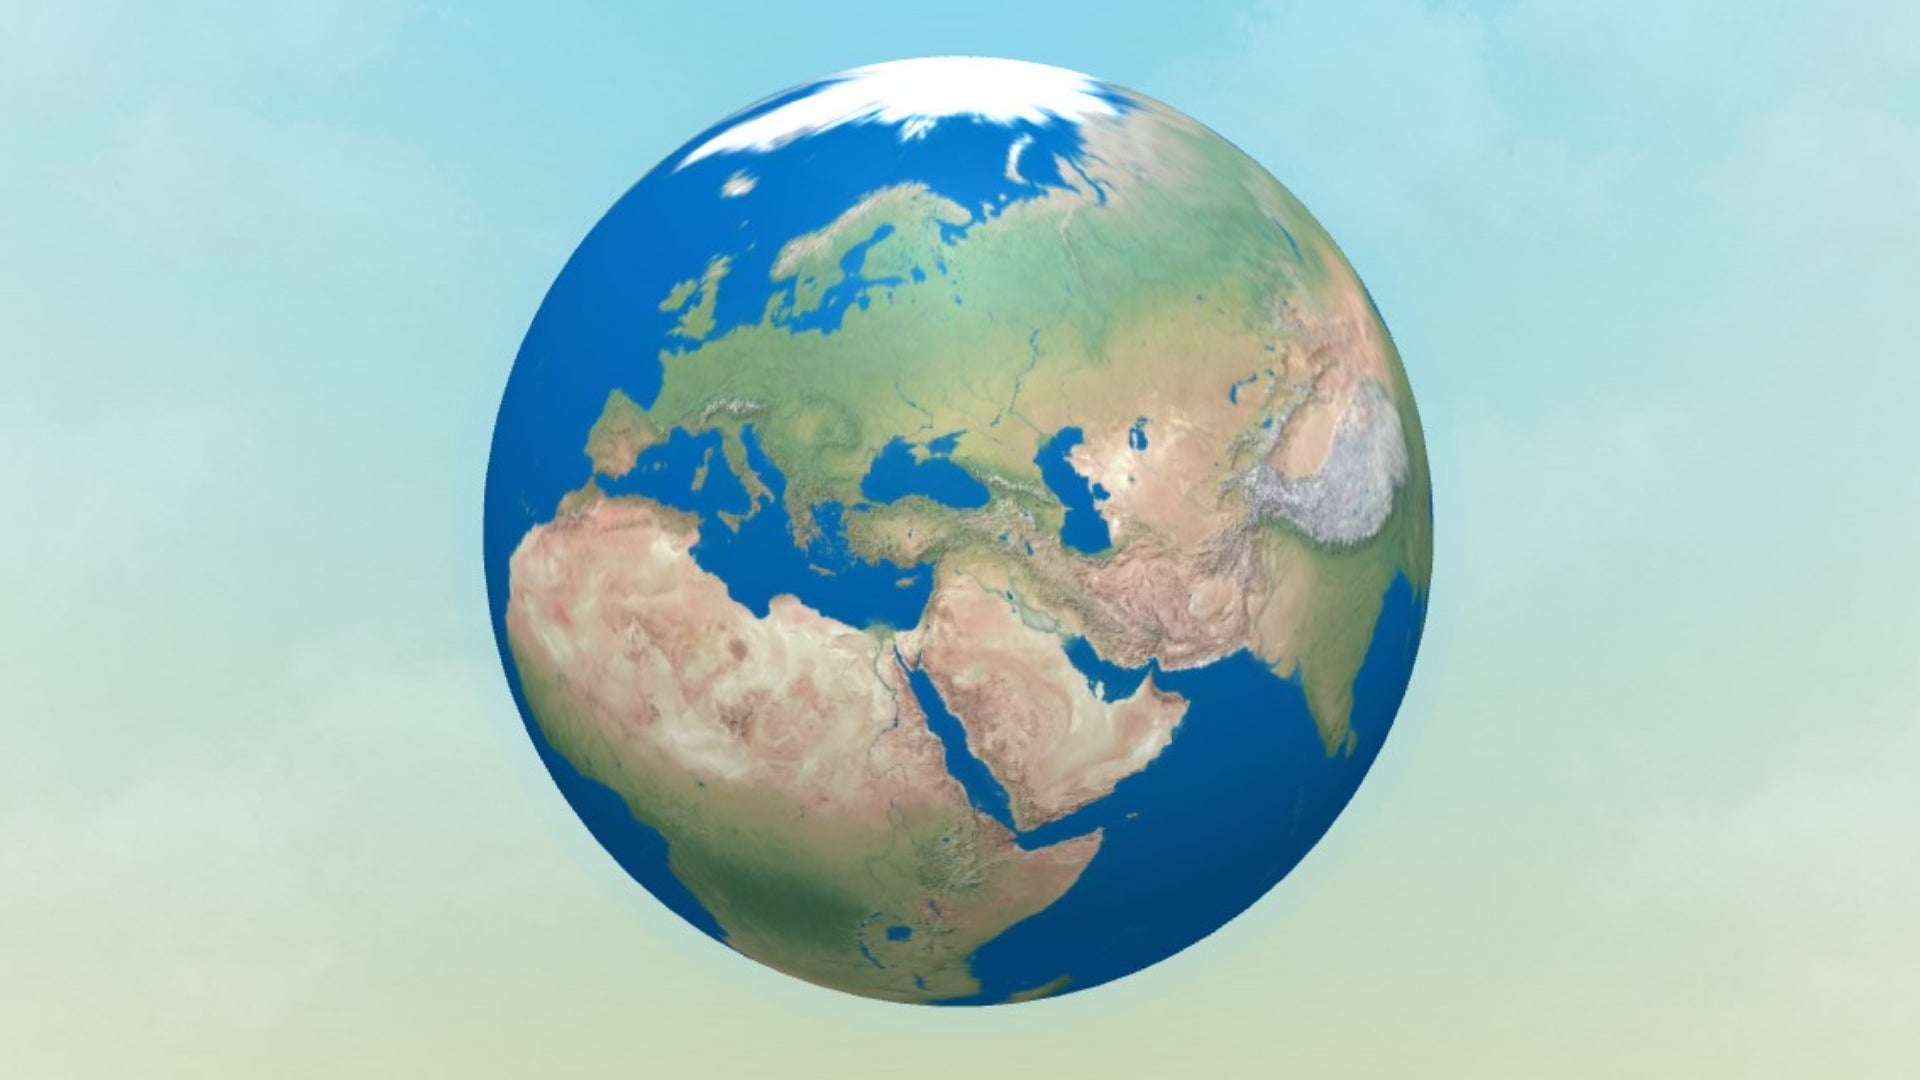 The globe used in the geography puzzle, Globle, is shown.